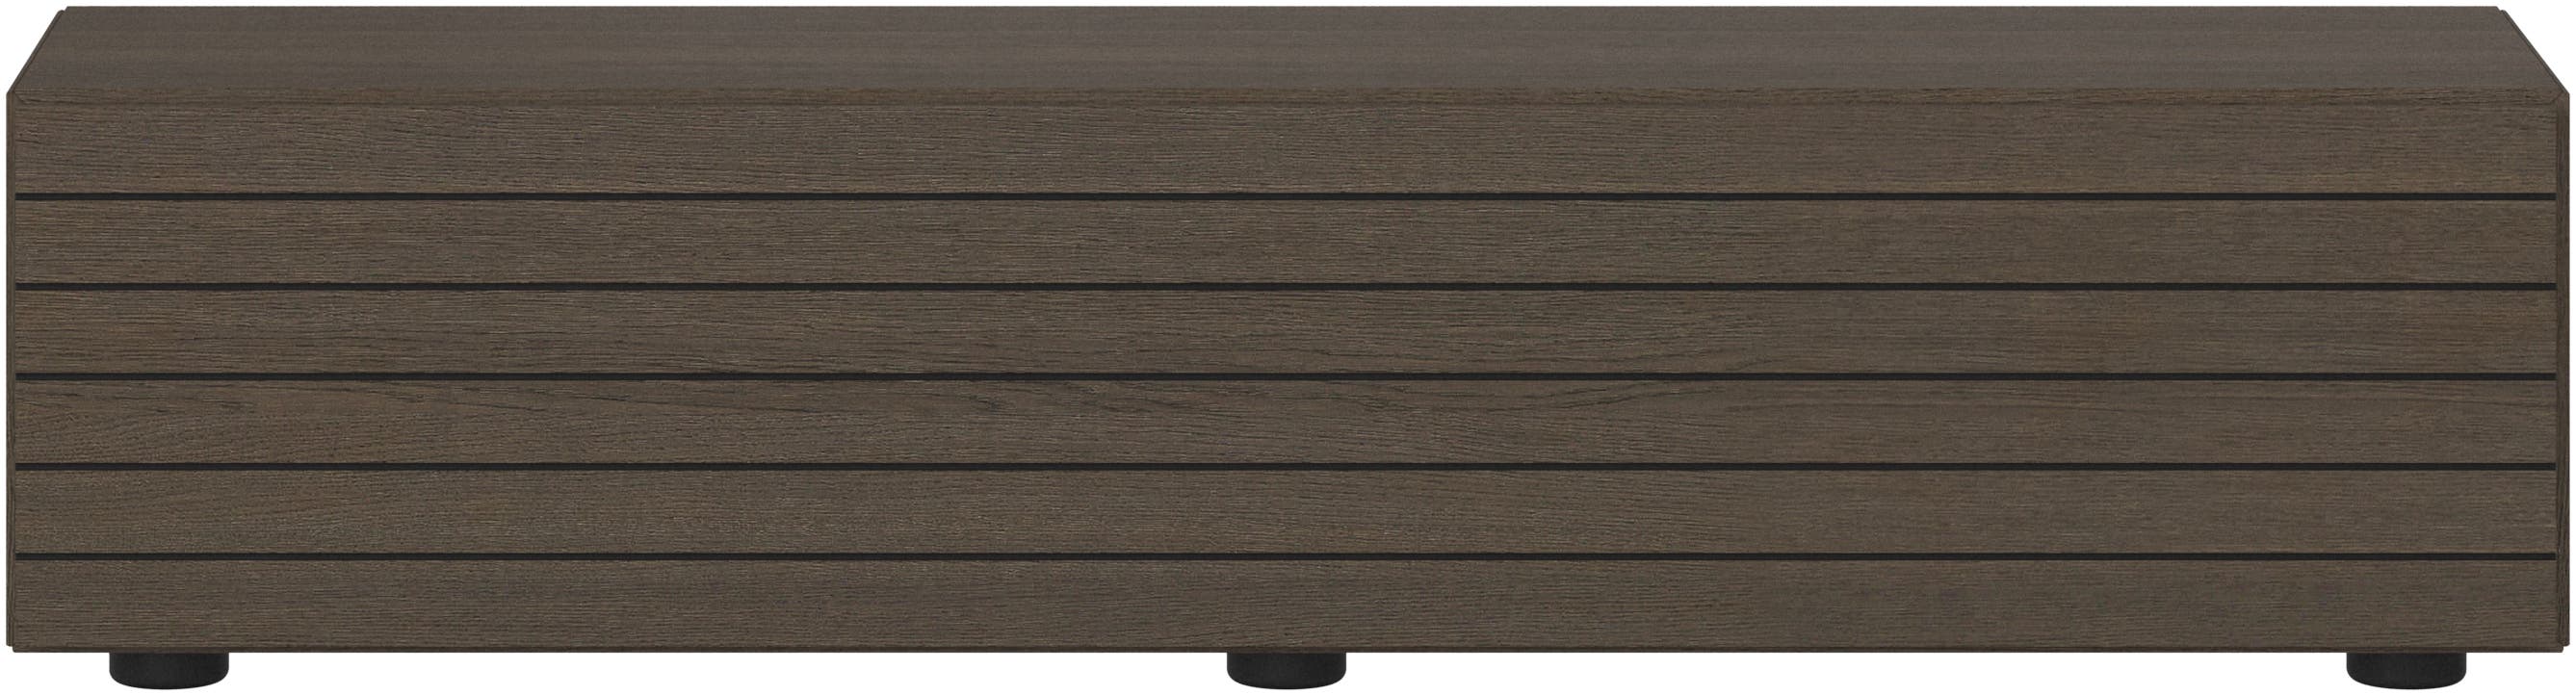 Lugano wall mounted cabinet with drop-down door